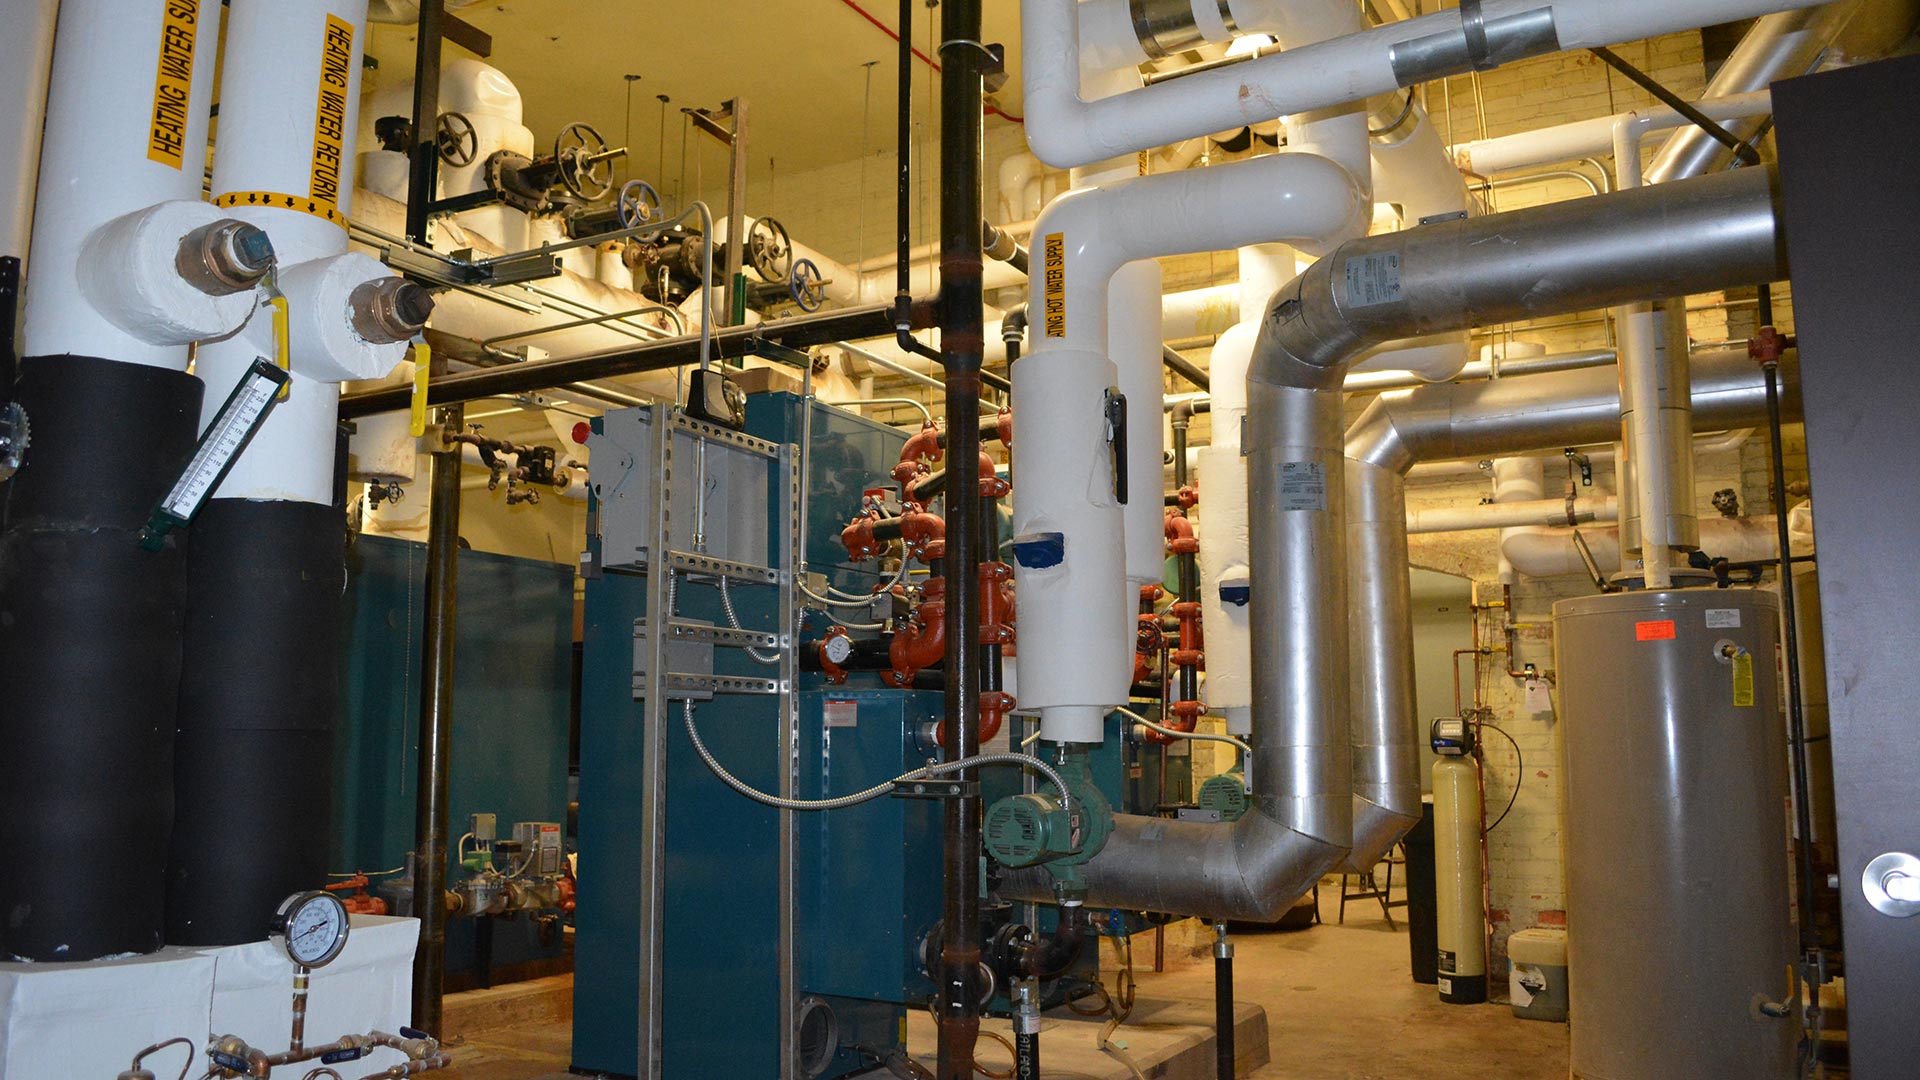 Hometown Plumbing and Heating Quad Cities Iowa Projects Garfield Elementary School mechanical piping